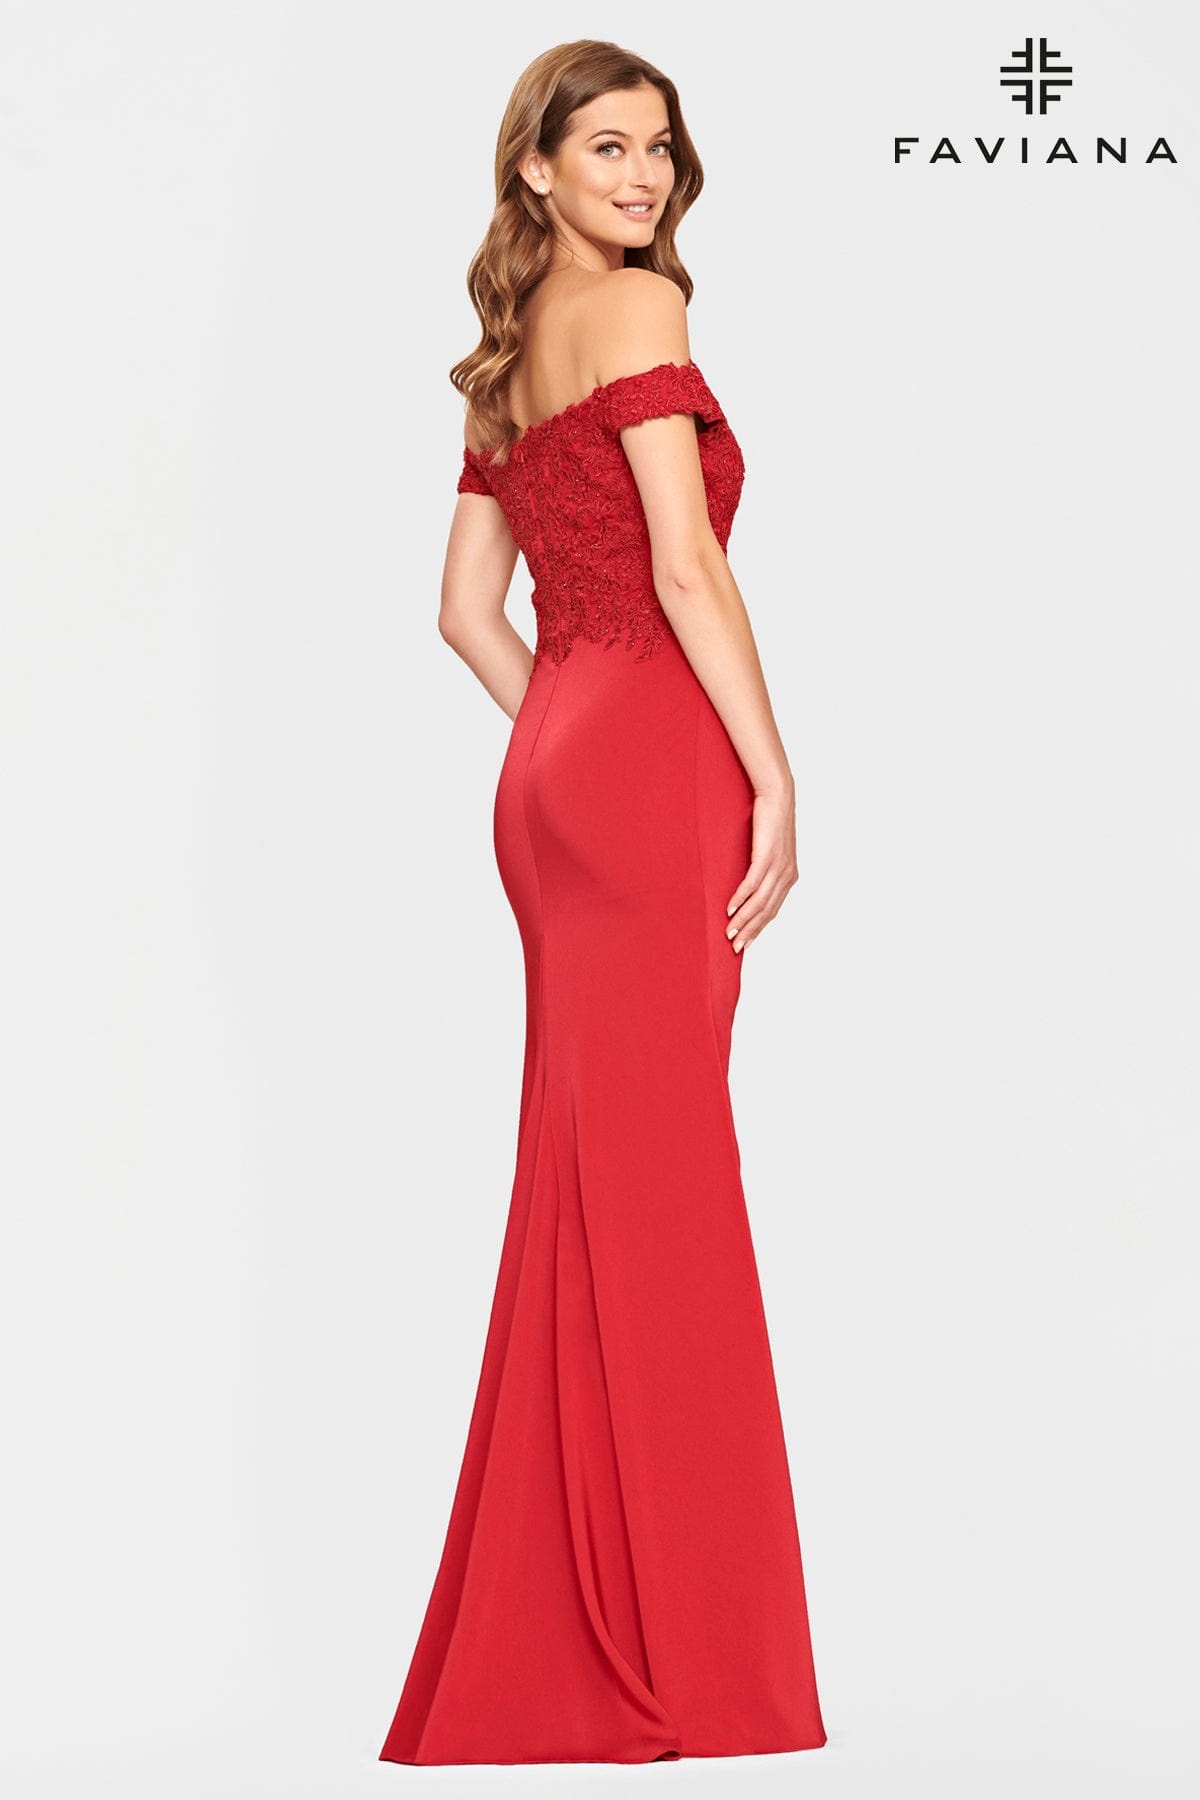 Long Strapless Dress With Lace Applique Bodice And Pleated Skirt In Extended Sizes